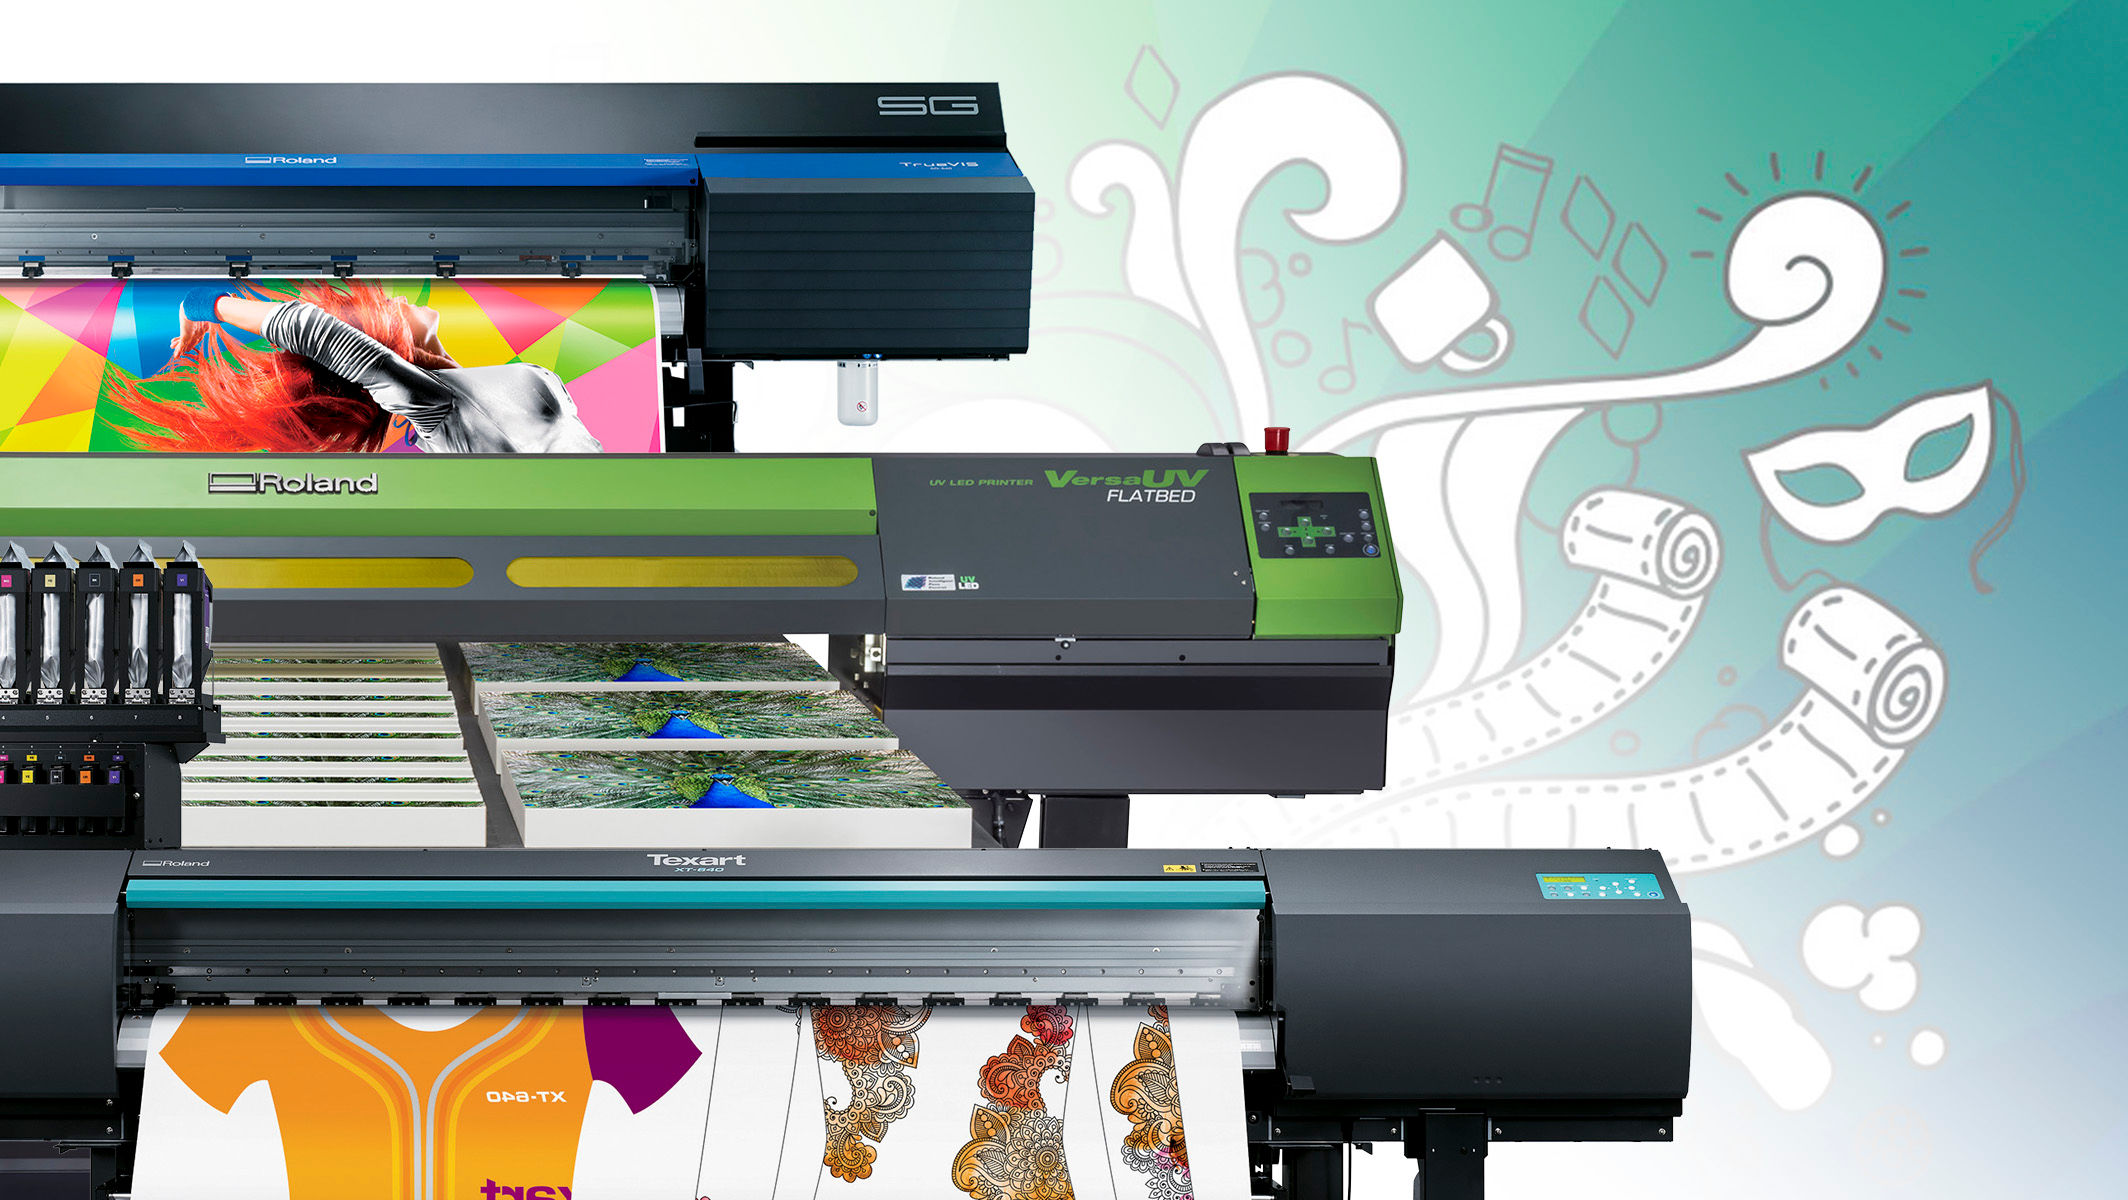 Roland DGA will showcase its latest digital printing technologies at the 2017 SGIA Expo in New Orleans.